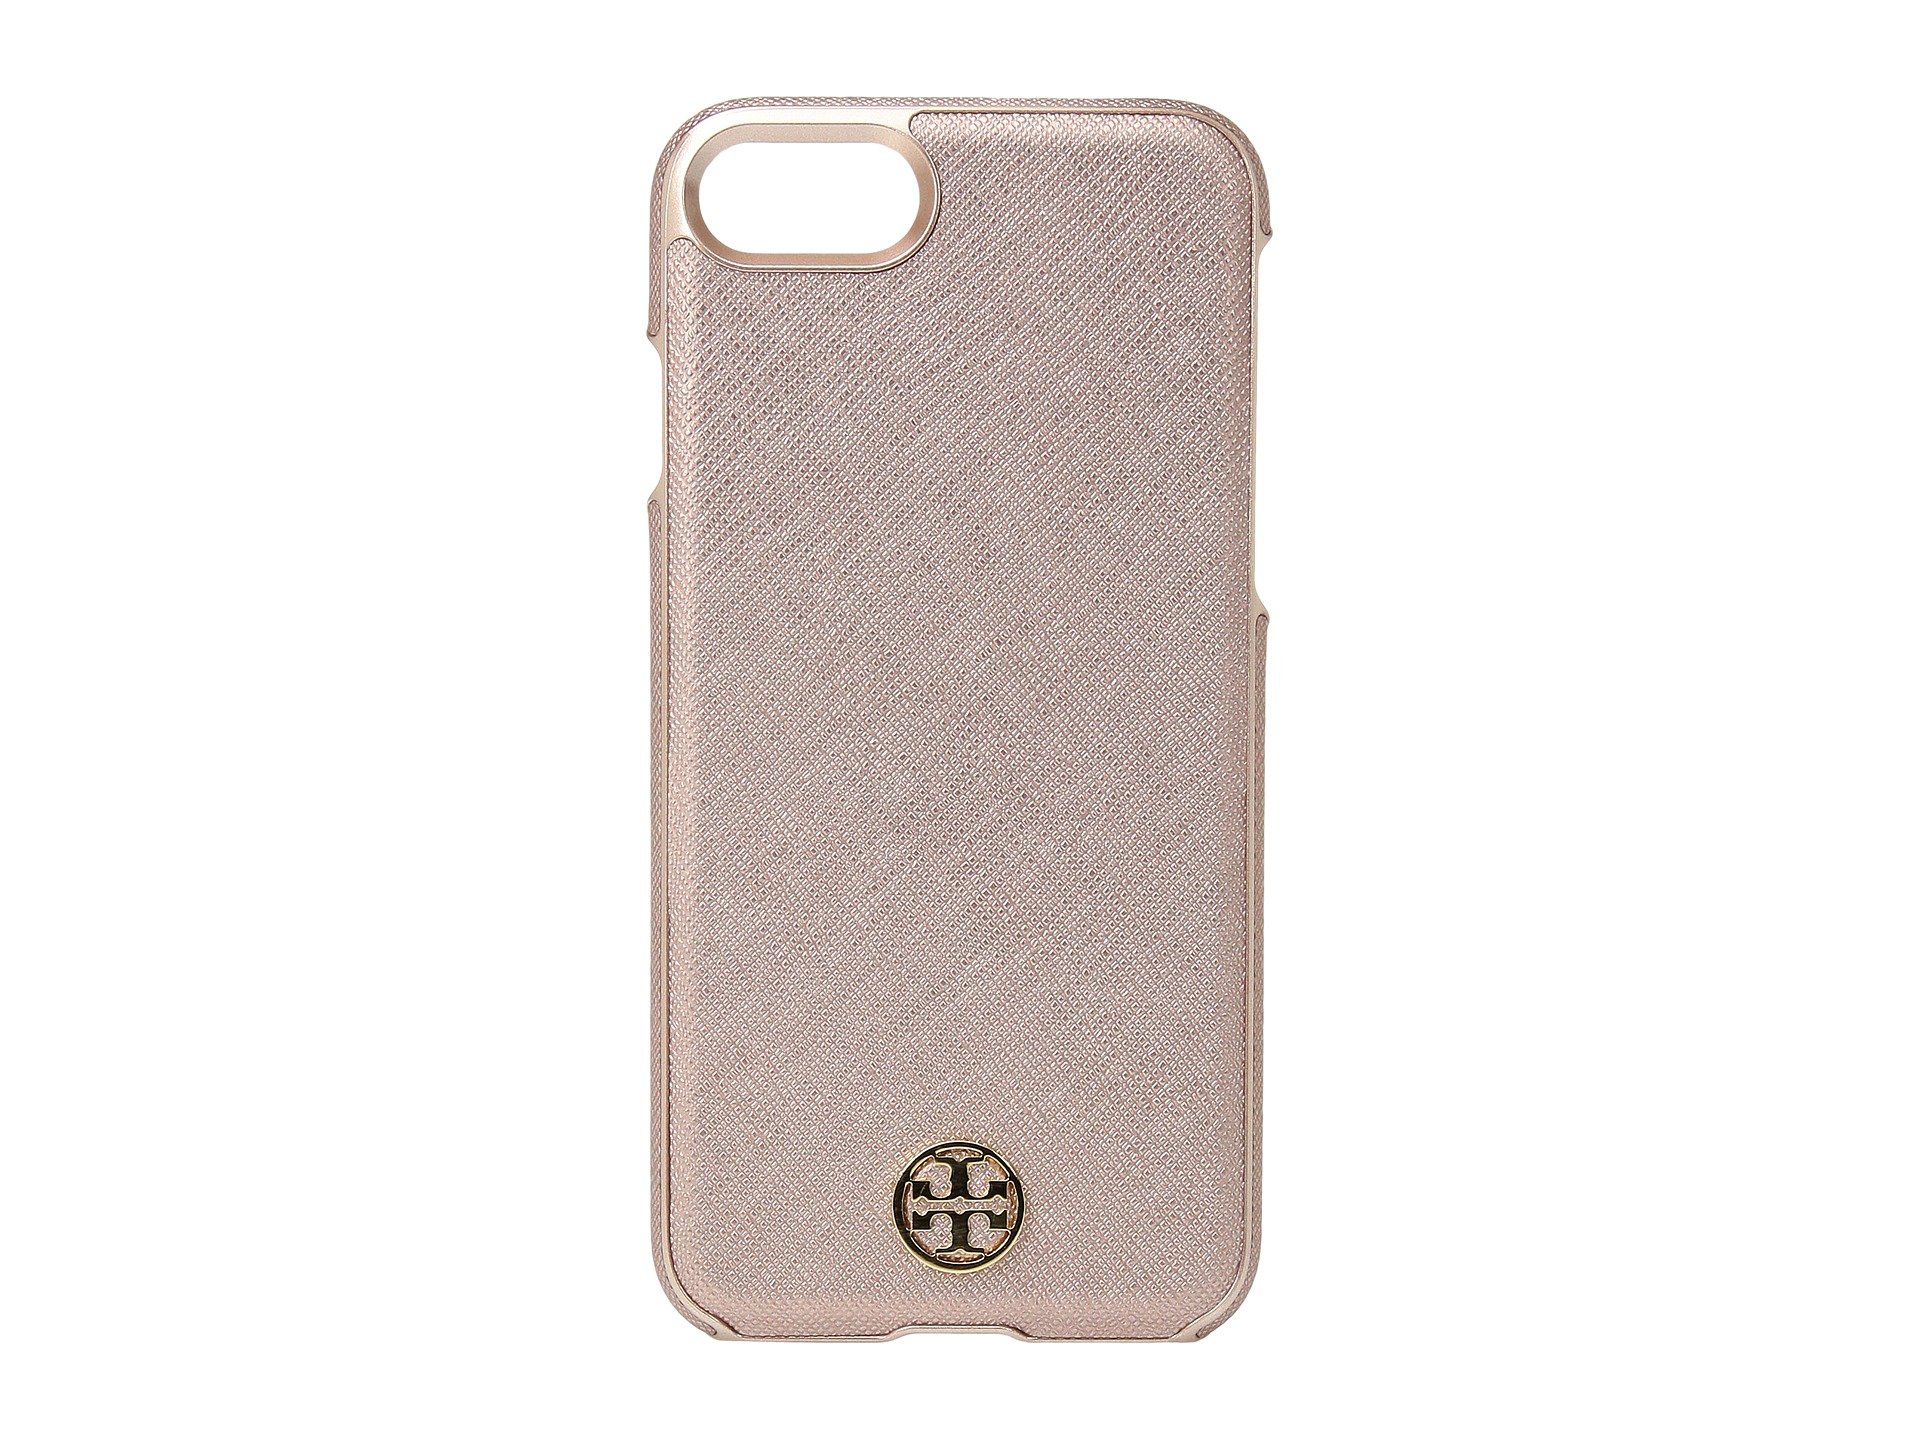 tory burch iphone case review